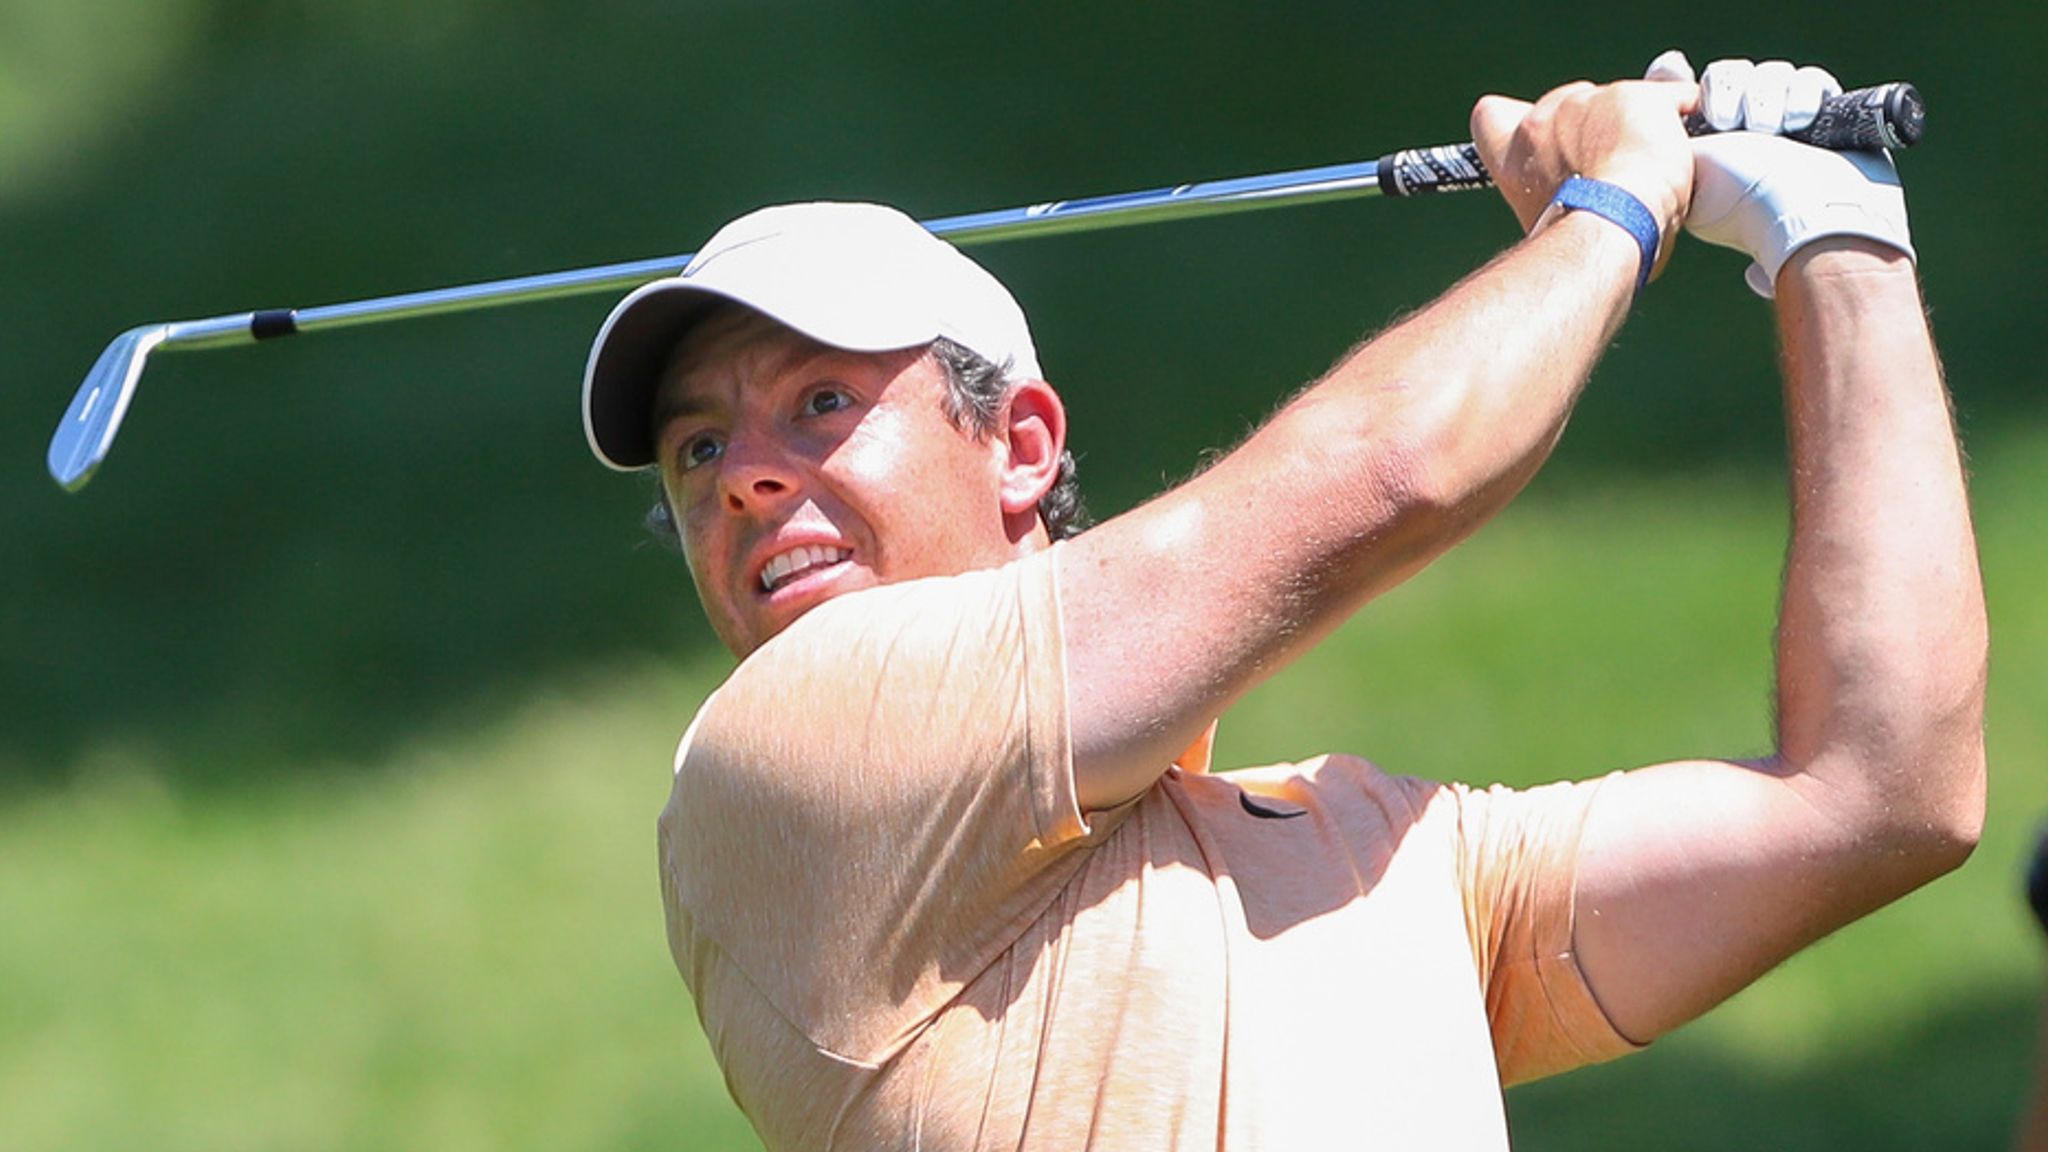 Rory McIlroy bounces back at Memorial Tournament to shoot second-round 68,  four shots behind leader Justin Suh in stacked field | Golf News | Sky  Sports